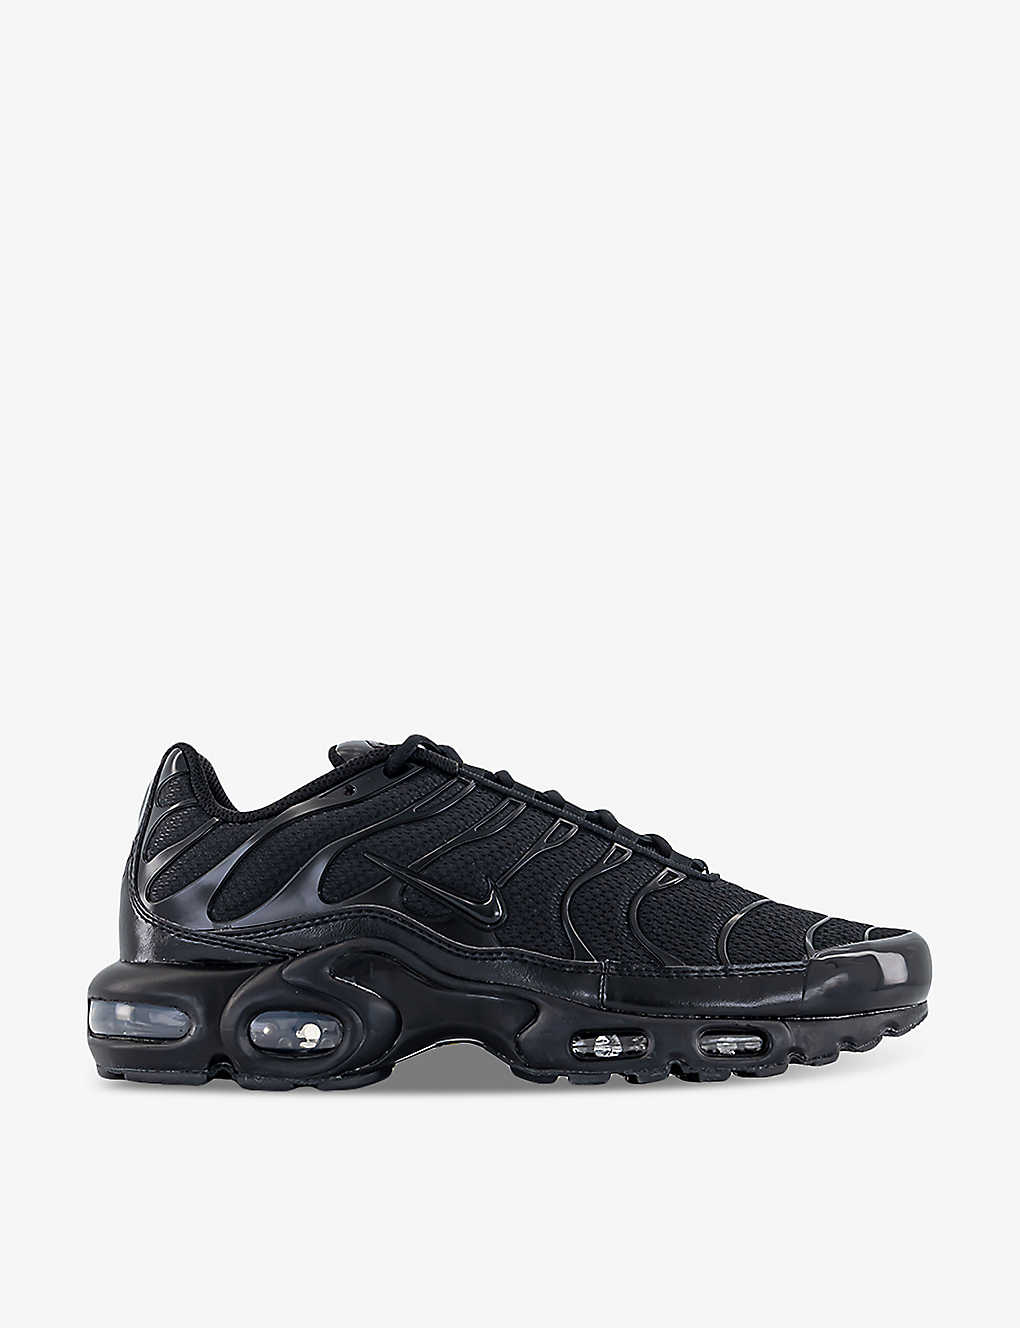 Shop Nike Mens Black Black Black Air Max Plus Brand-embroidered Woven Low-top Trainers